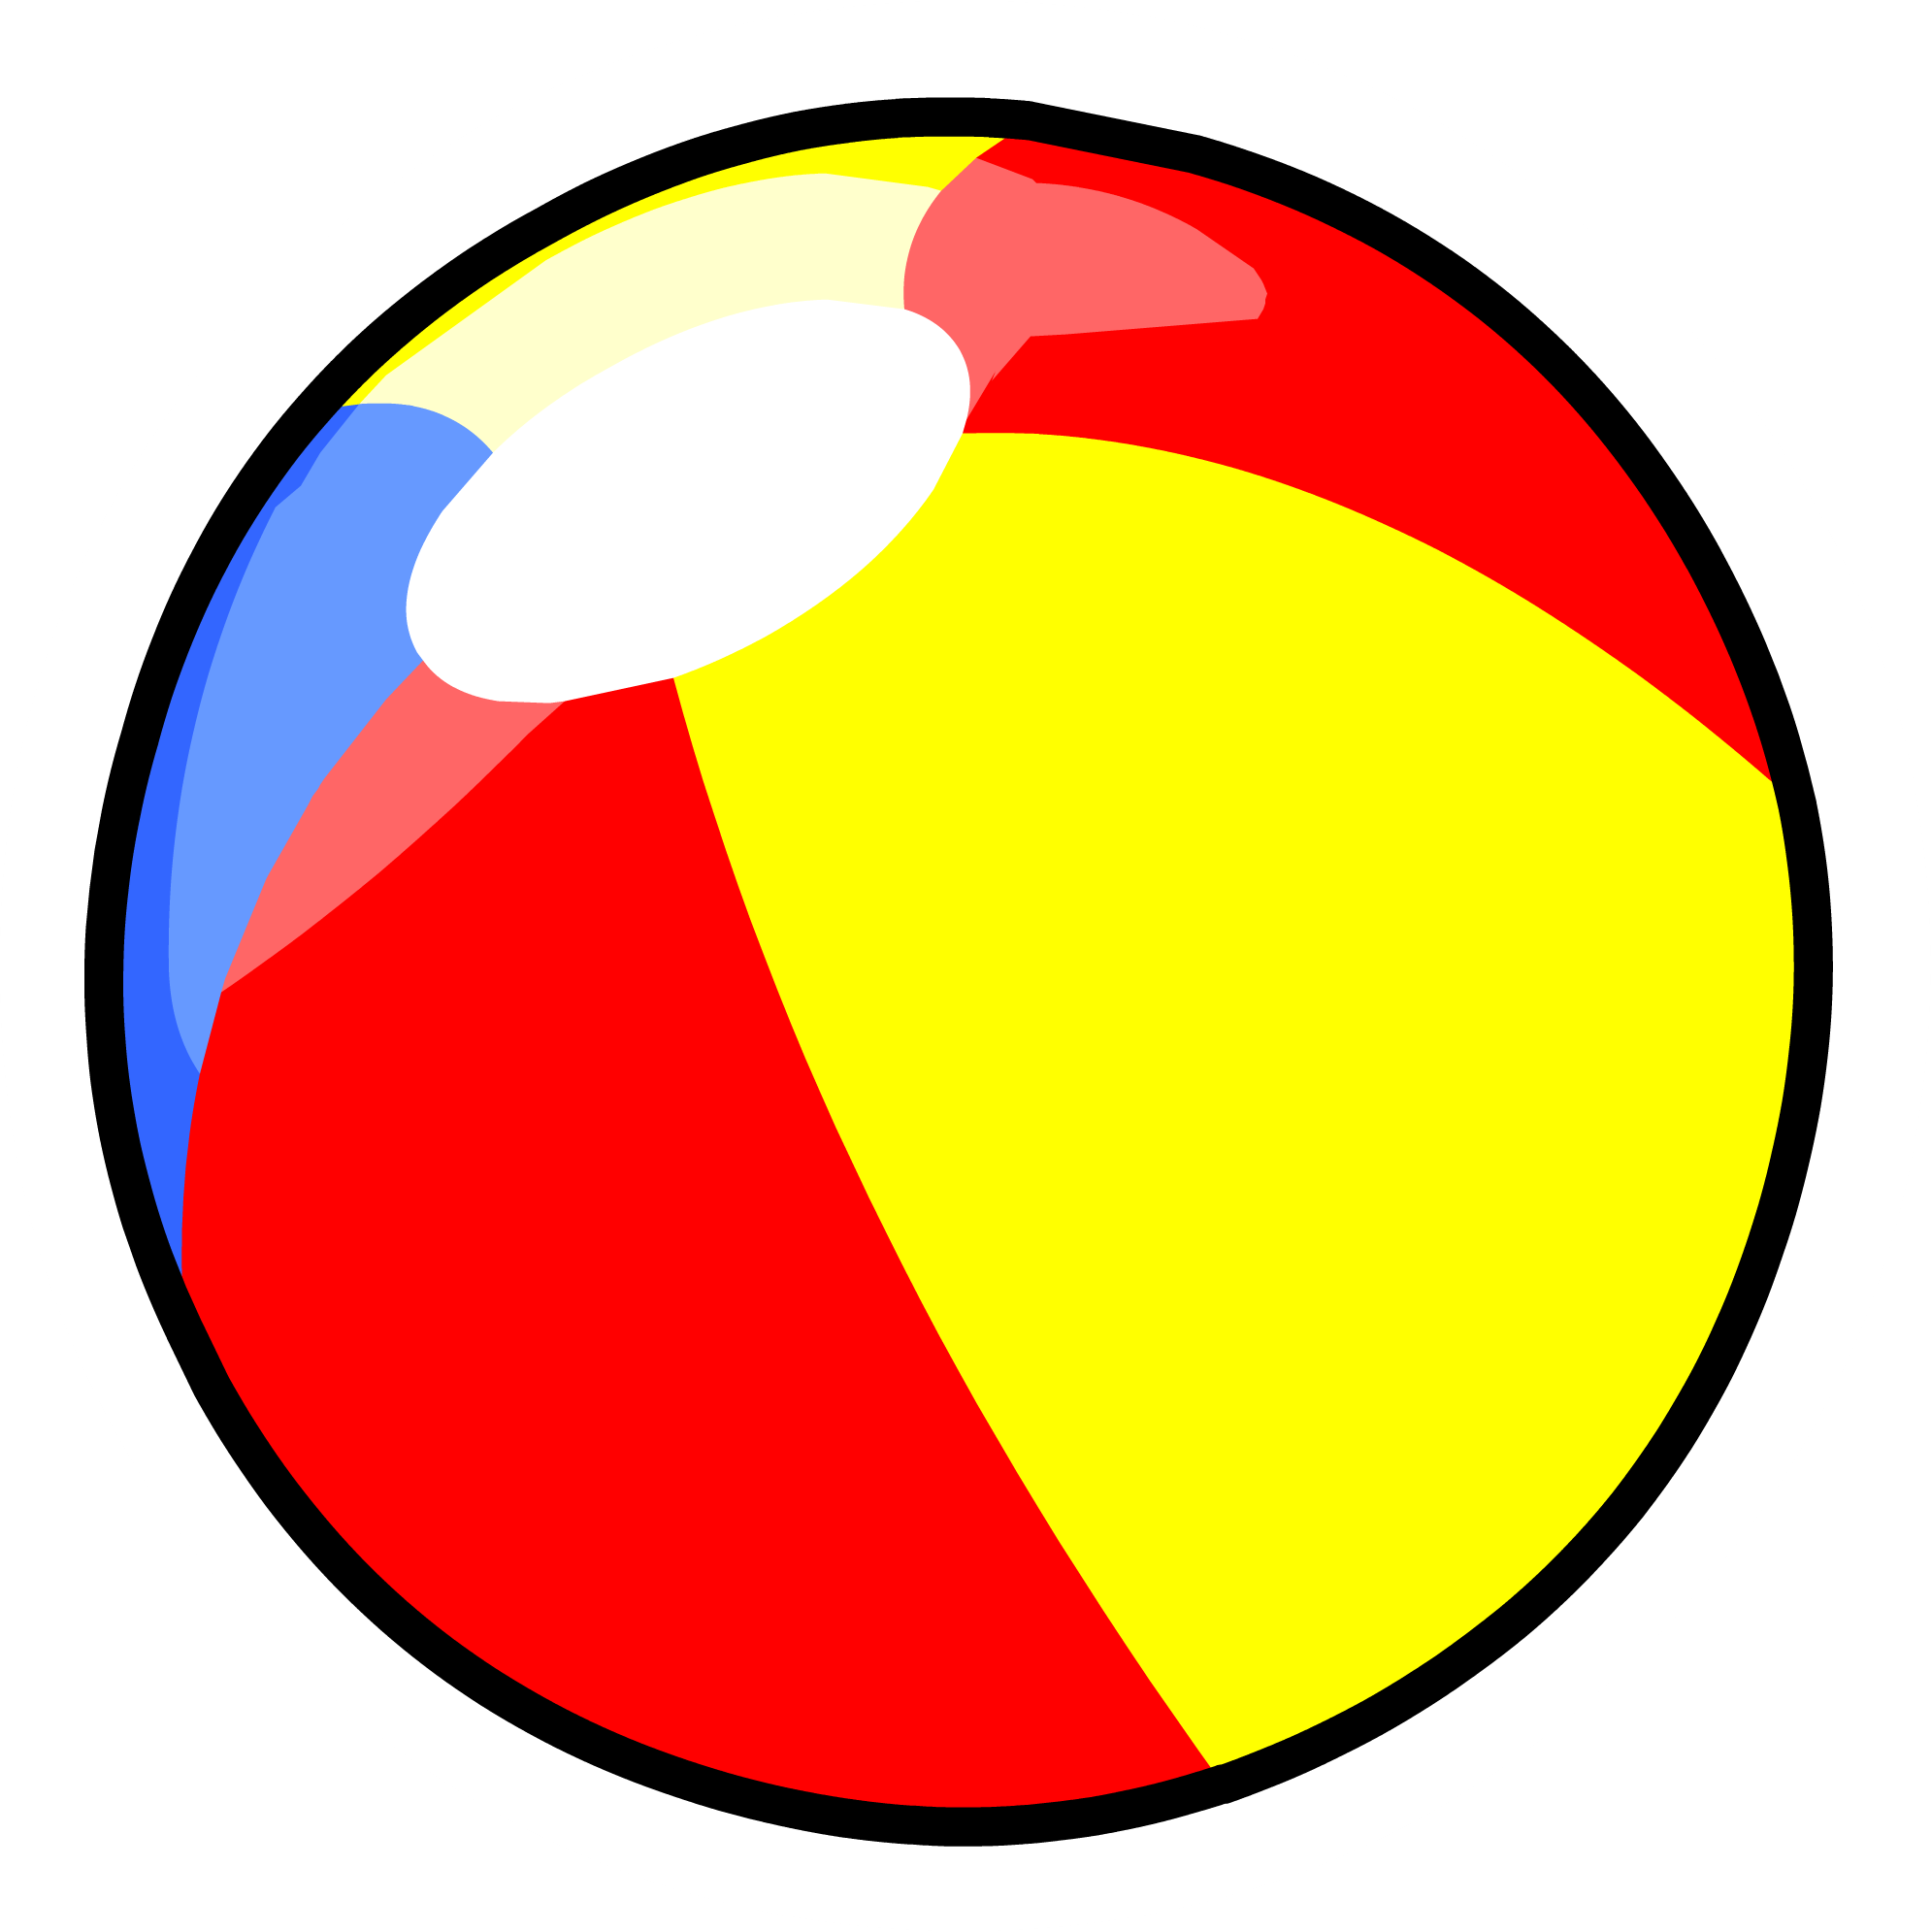 Rainbow Ball Beach Free Download Image PNG Image